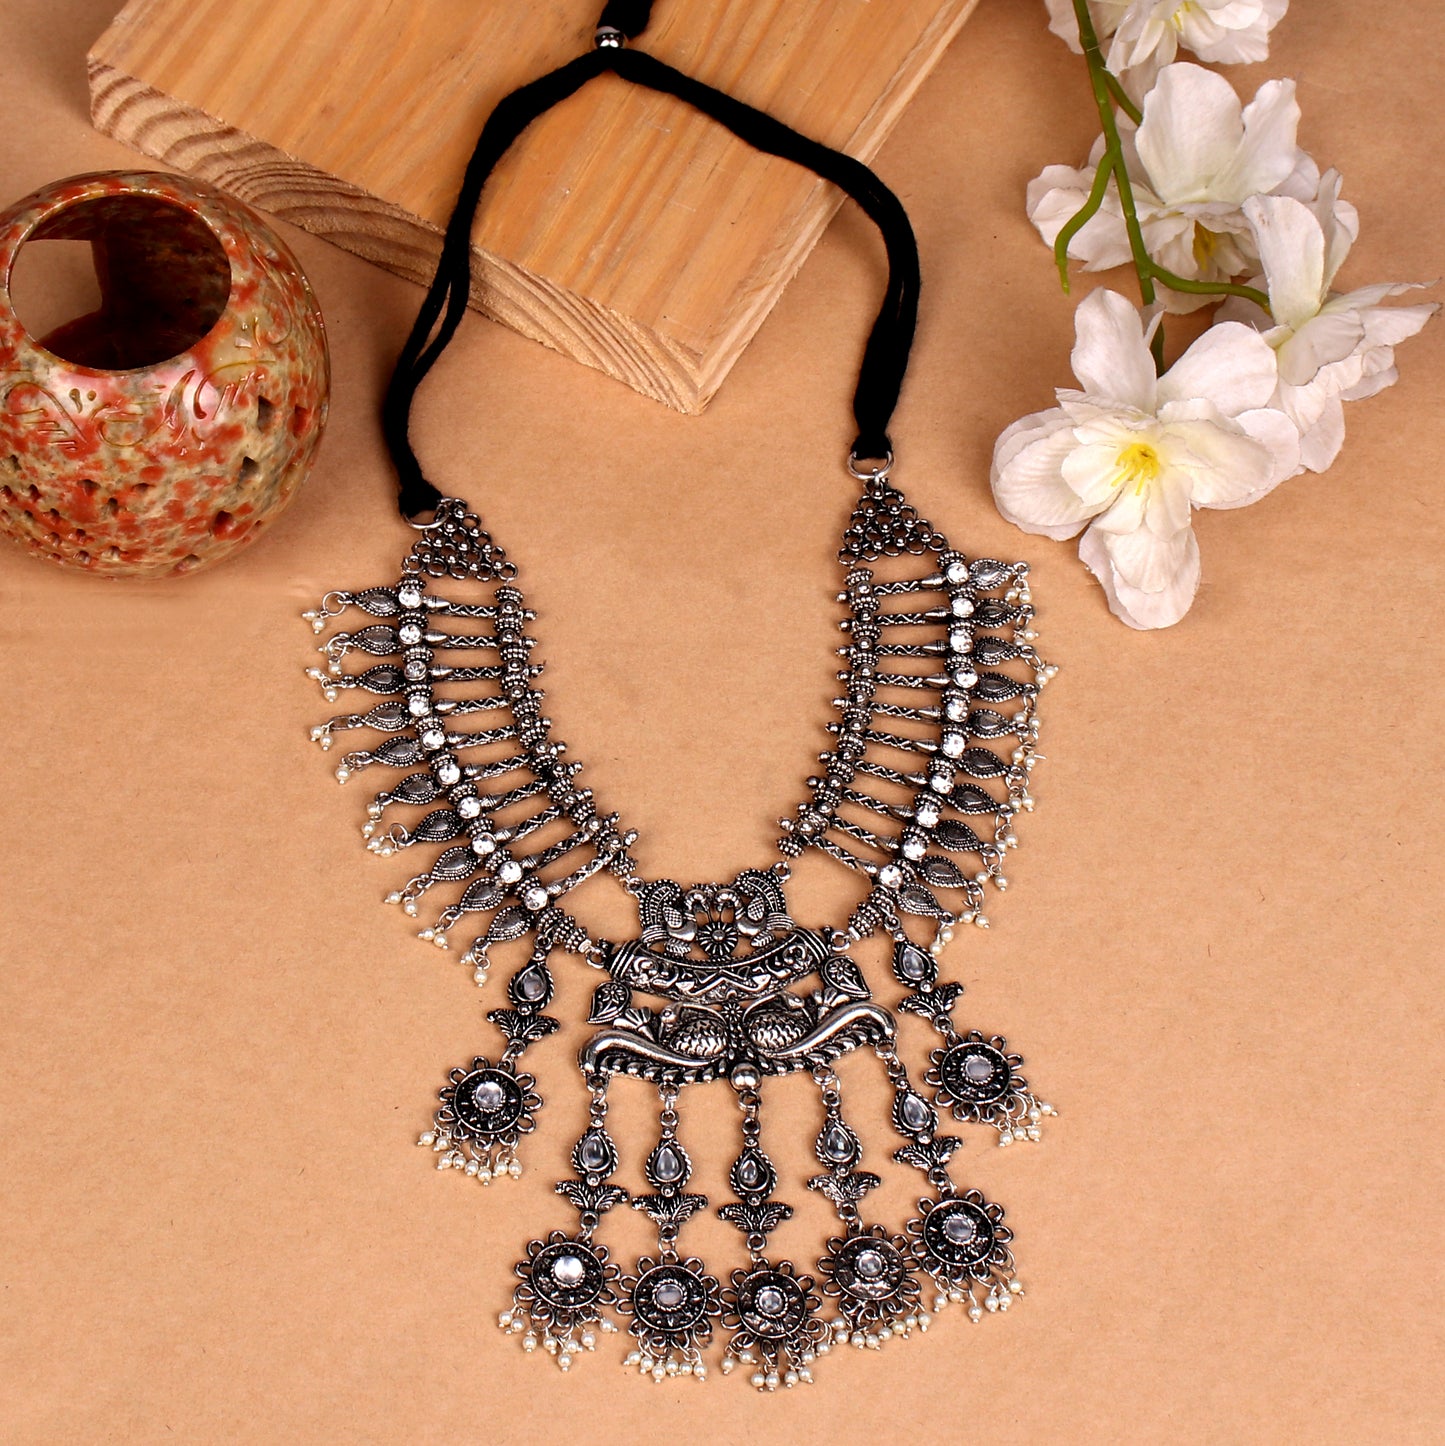 The Peacock Stalwart Necklace